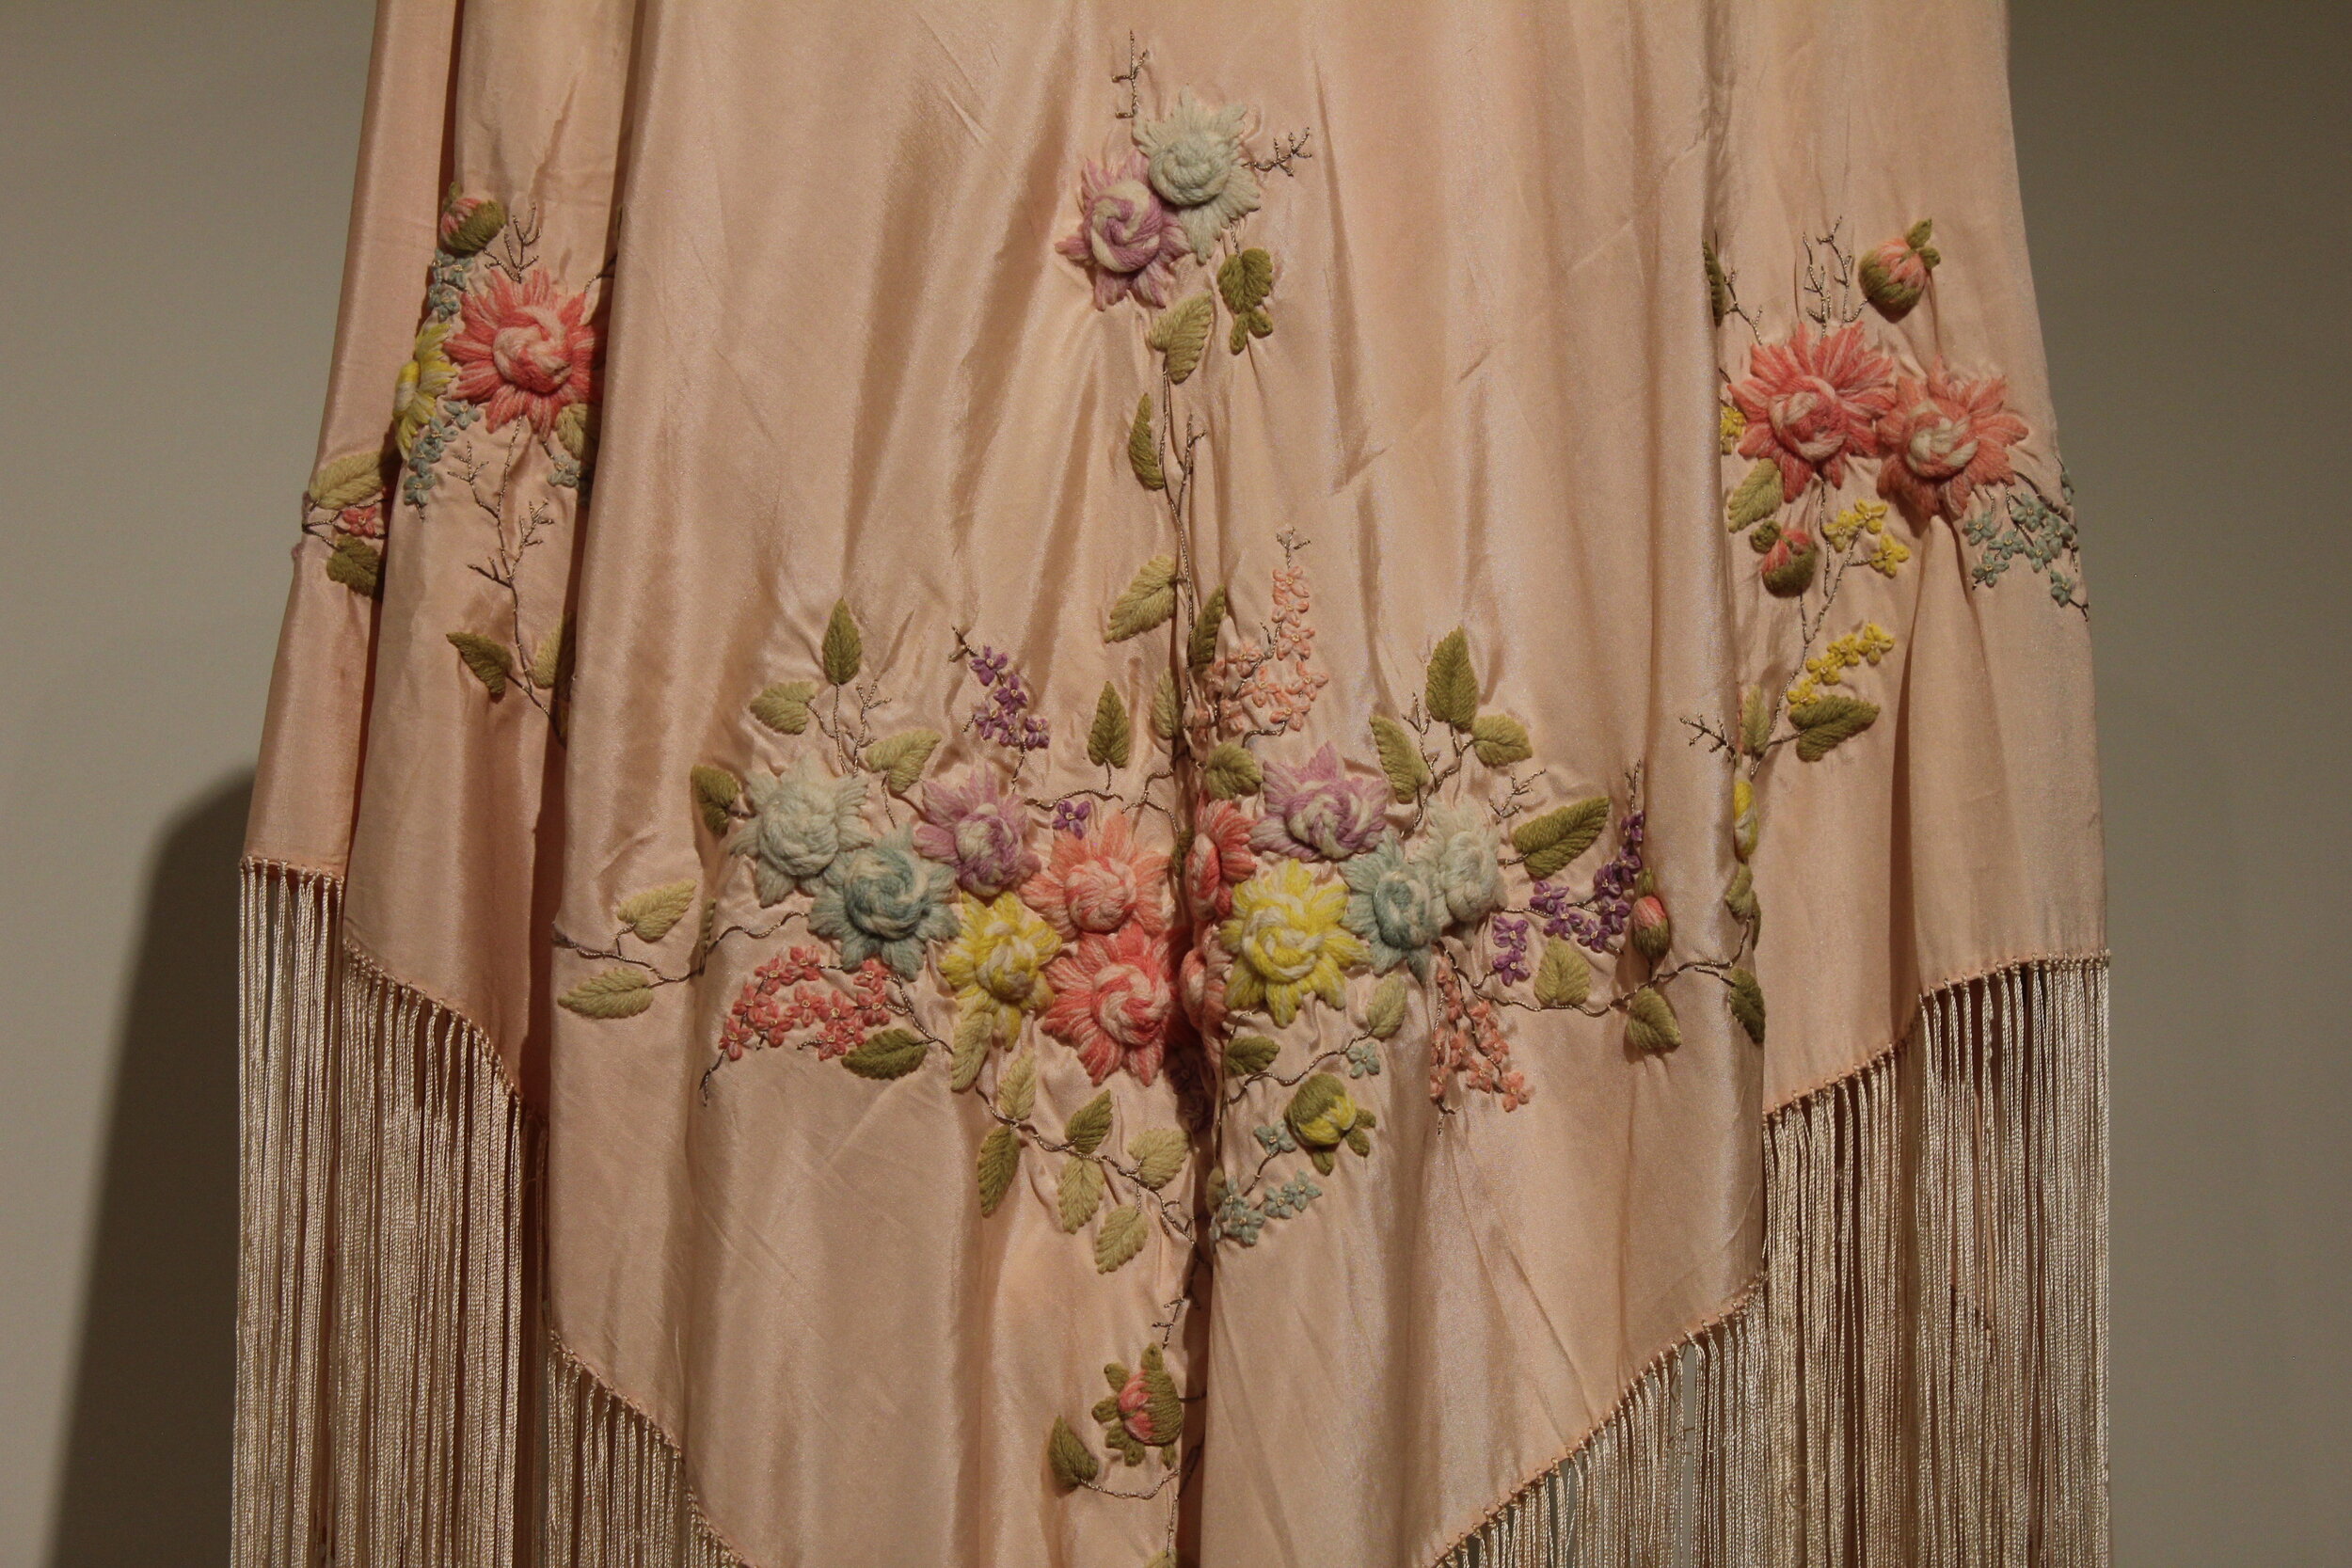 Piano shawl (detail), c. 1920s, silk, thread, Collection of The Grace Museum, Gift of Ms. Martha Pender